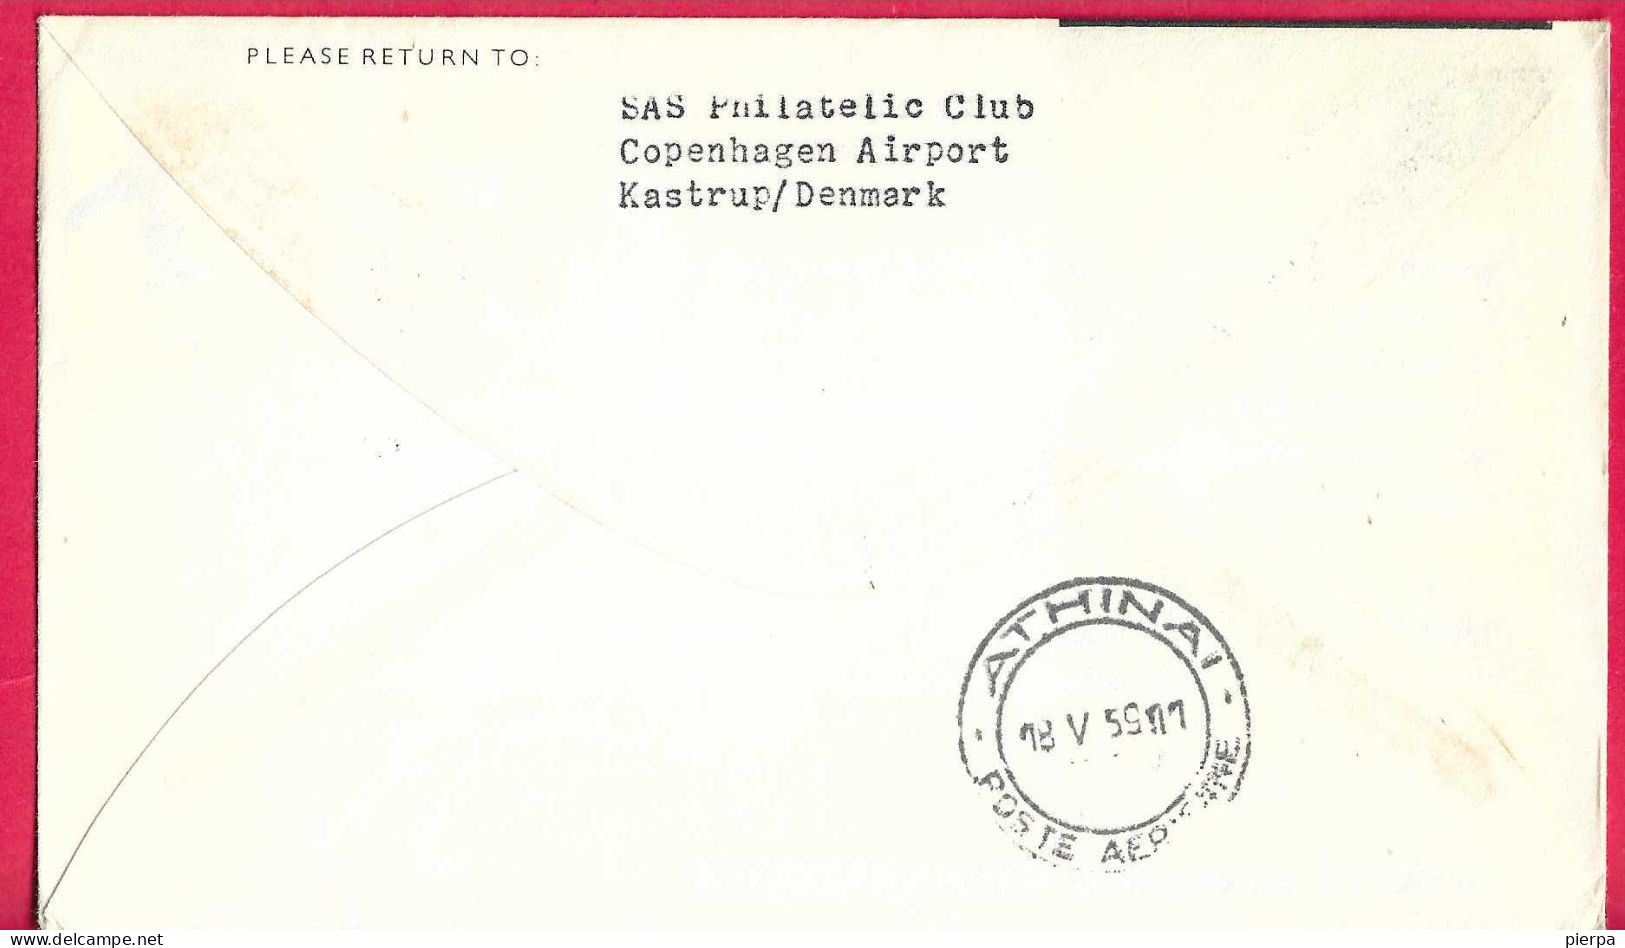 DANMARK - FIRST CARAVELLE FLIGHT - SAS - FROM KOBENHAVN TO ATHENS *17.5.59* ON OFFICIAL COVER - Airmail